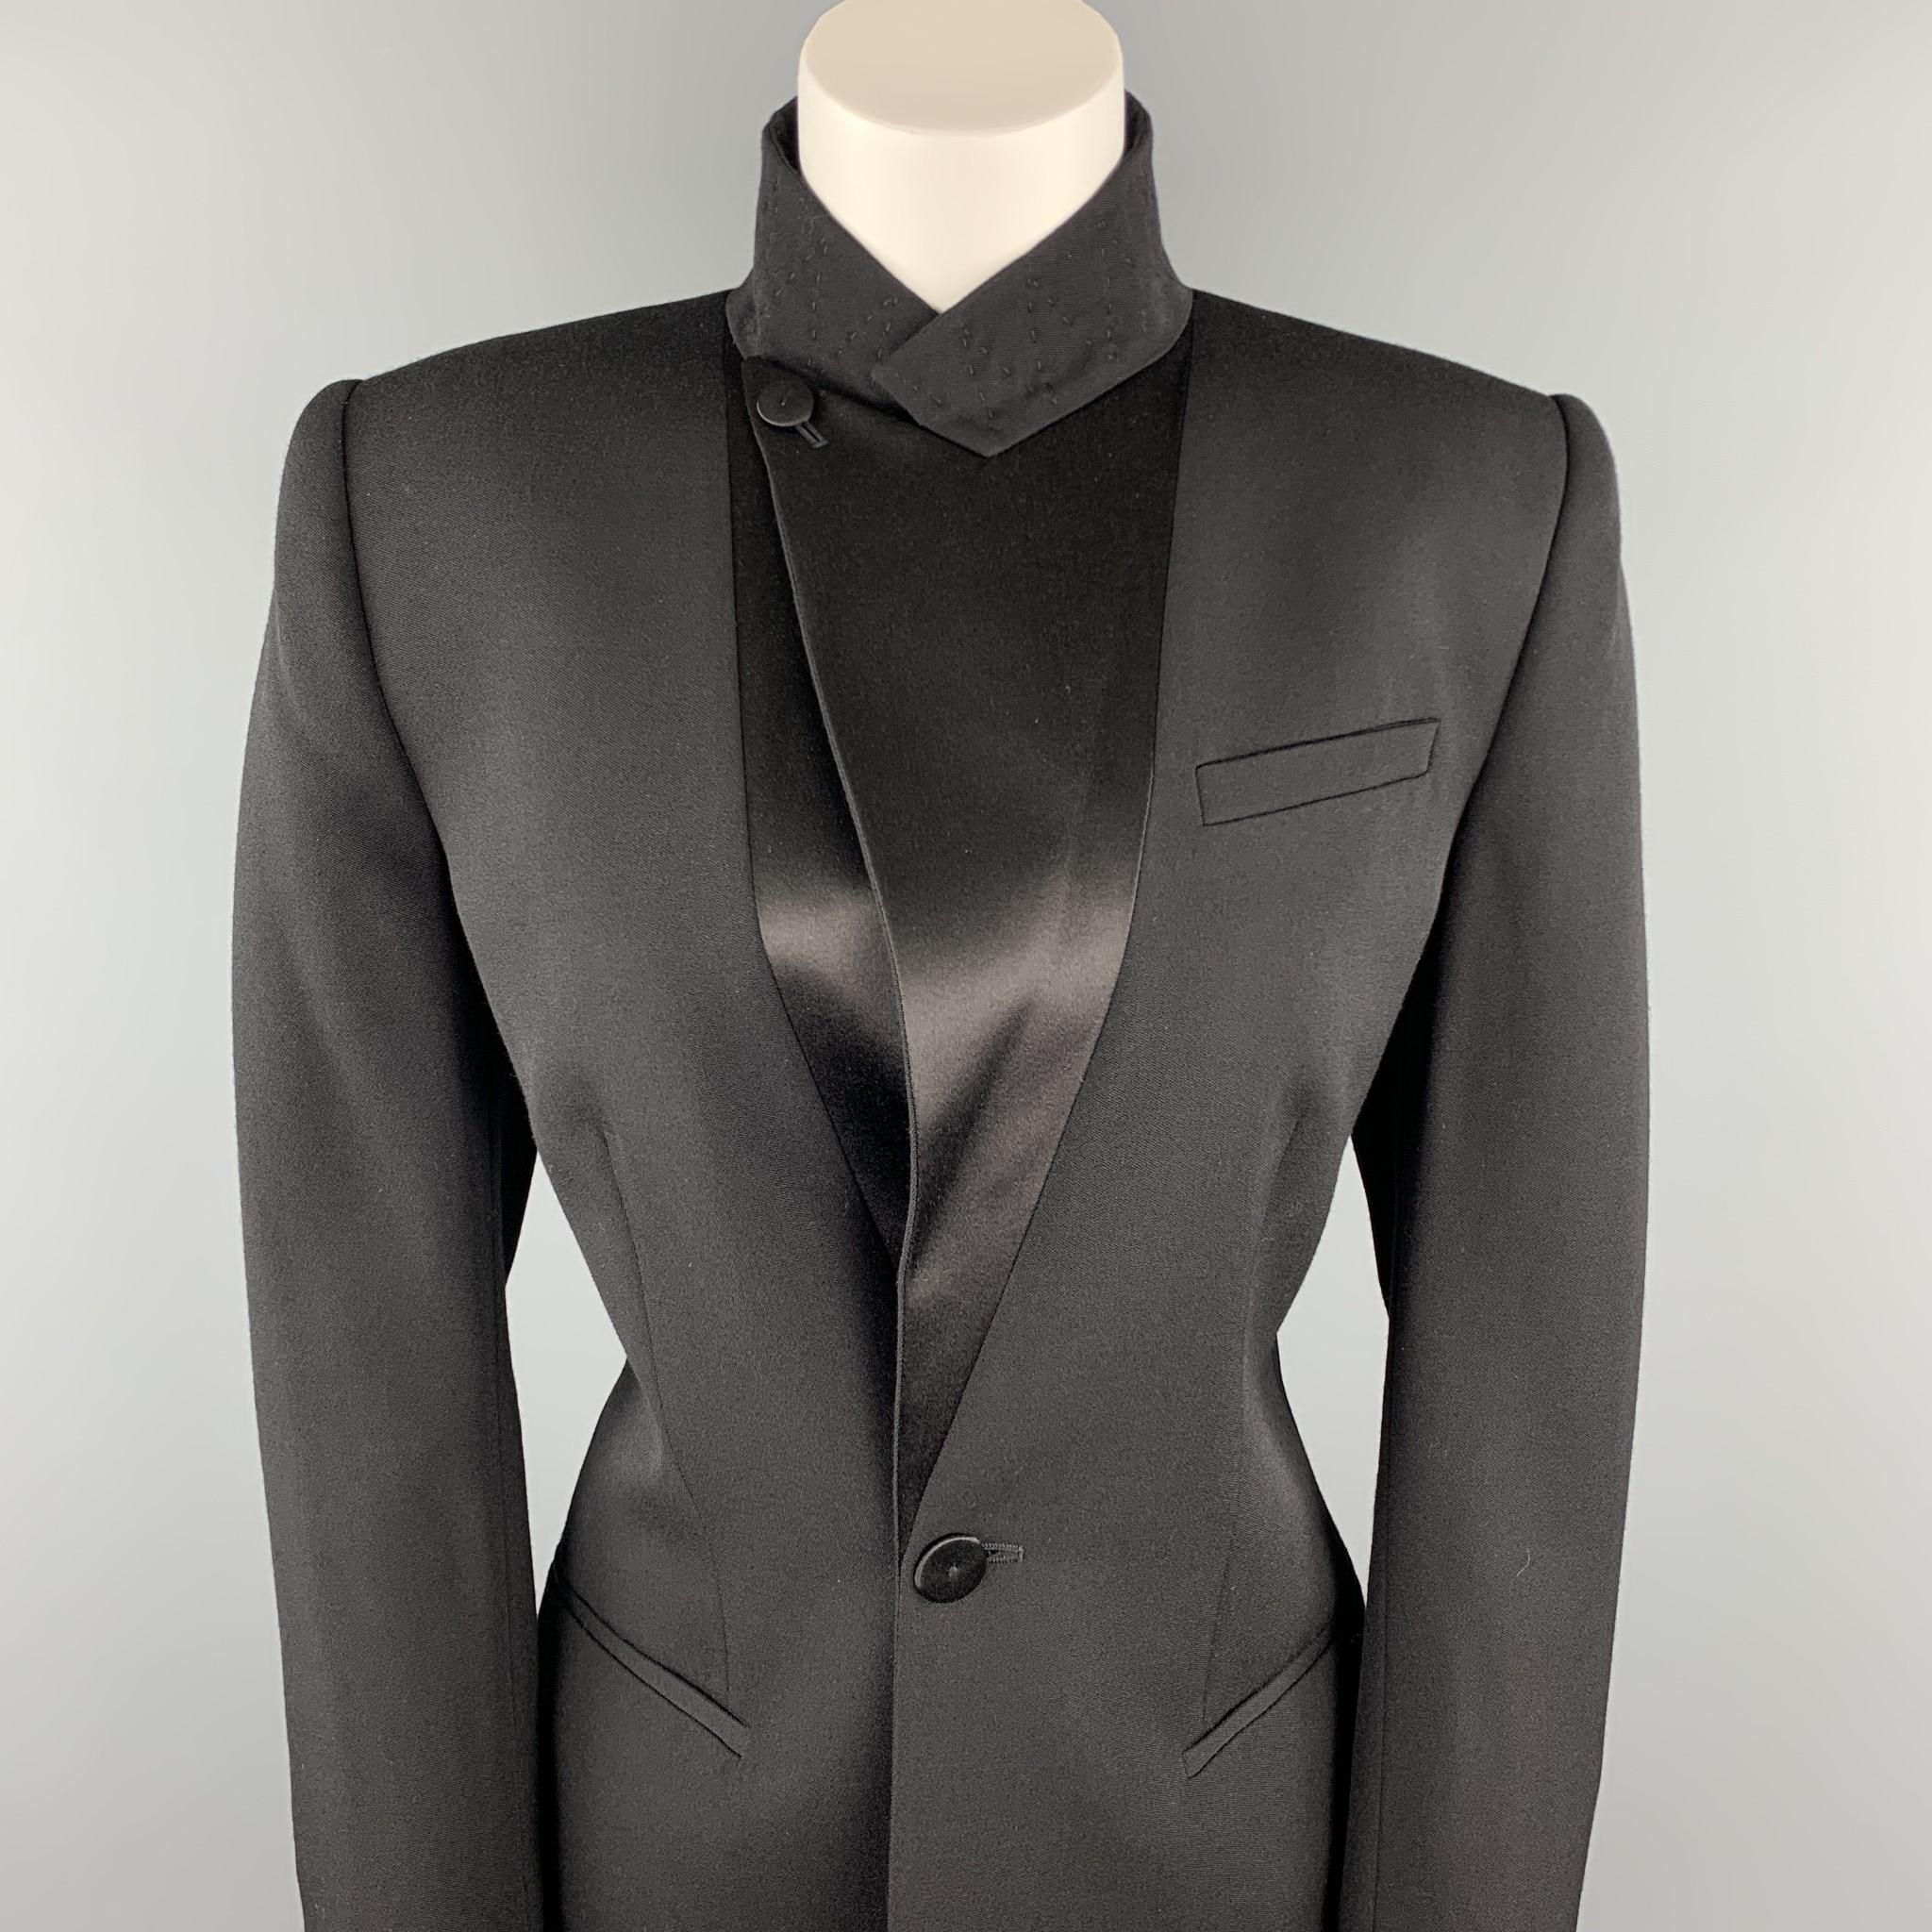 JEAN PAUL GAULTIER blazer comes in a black wool with a light pink liner featuring a peak lapel style, corset back design, and a single button closure. Made in Italy.

Excellent Pre-Owned Condition.
Marked: USA 10

Measurements:

Shoulder: 17 in.